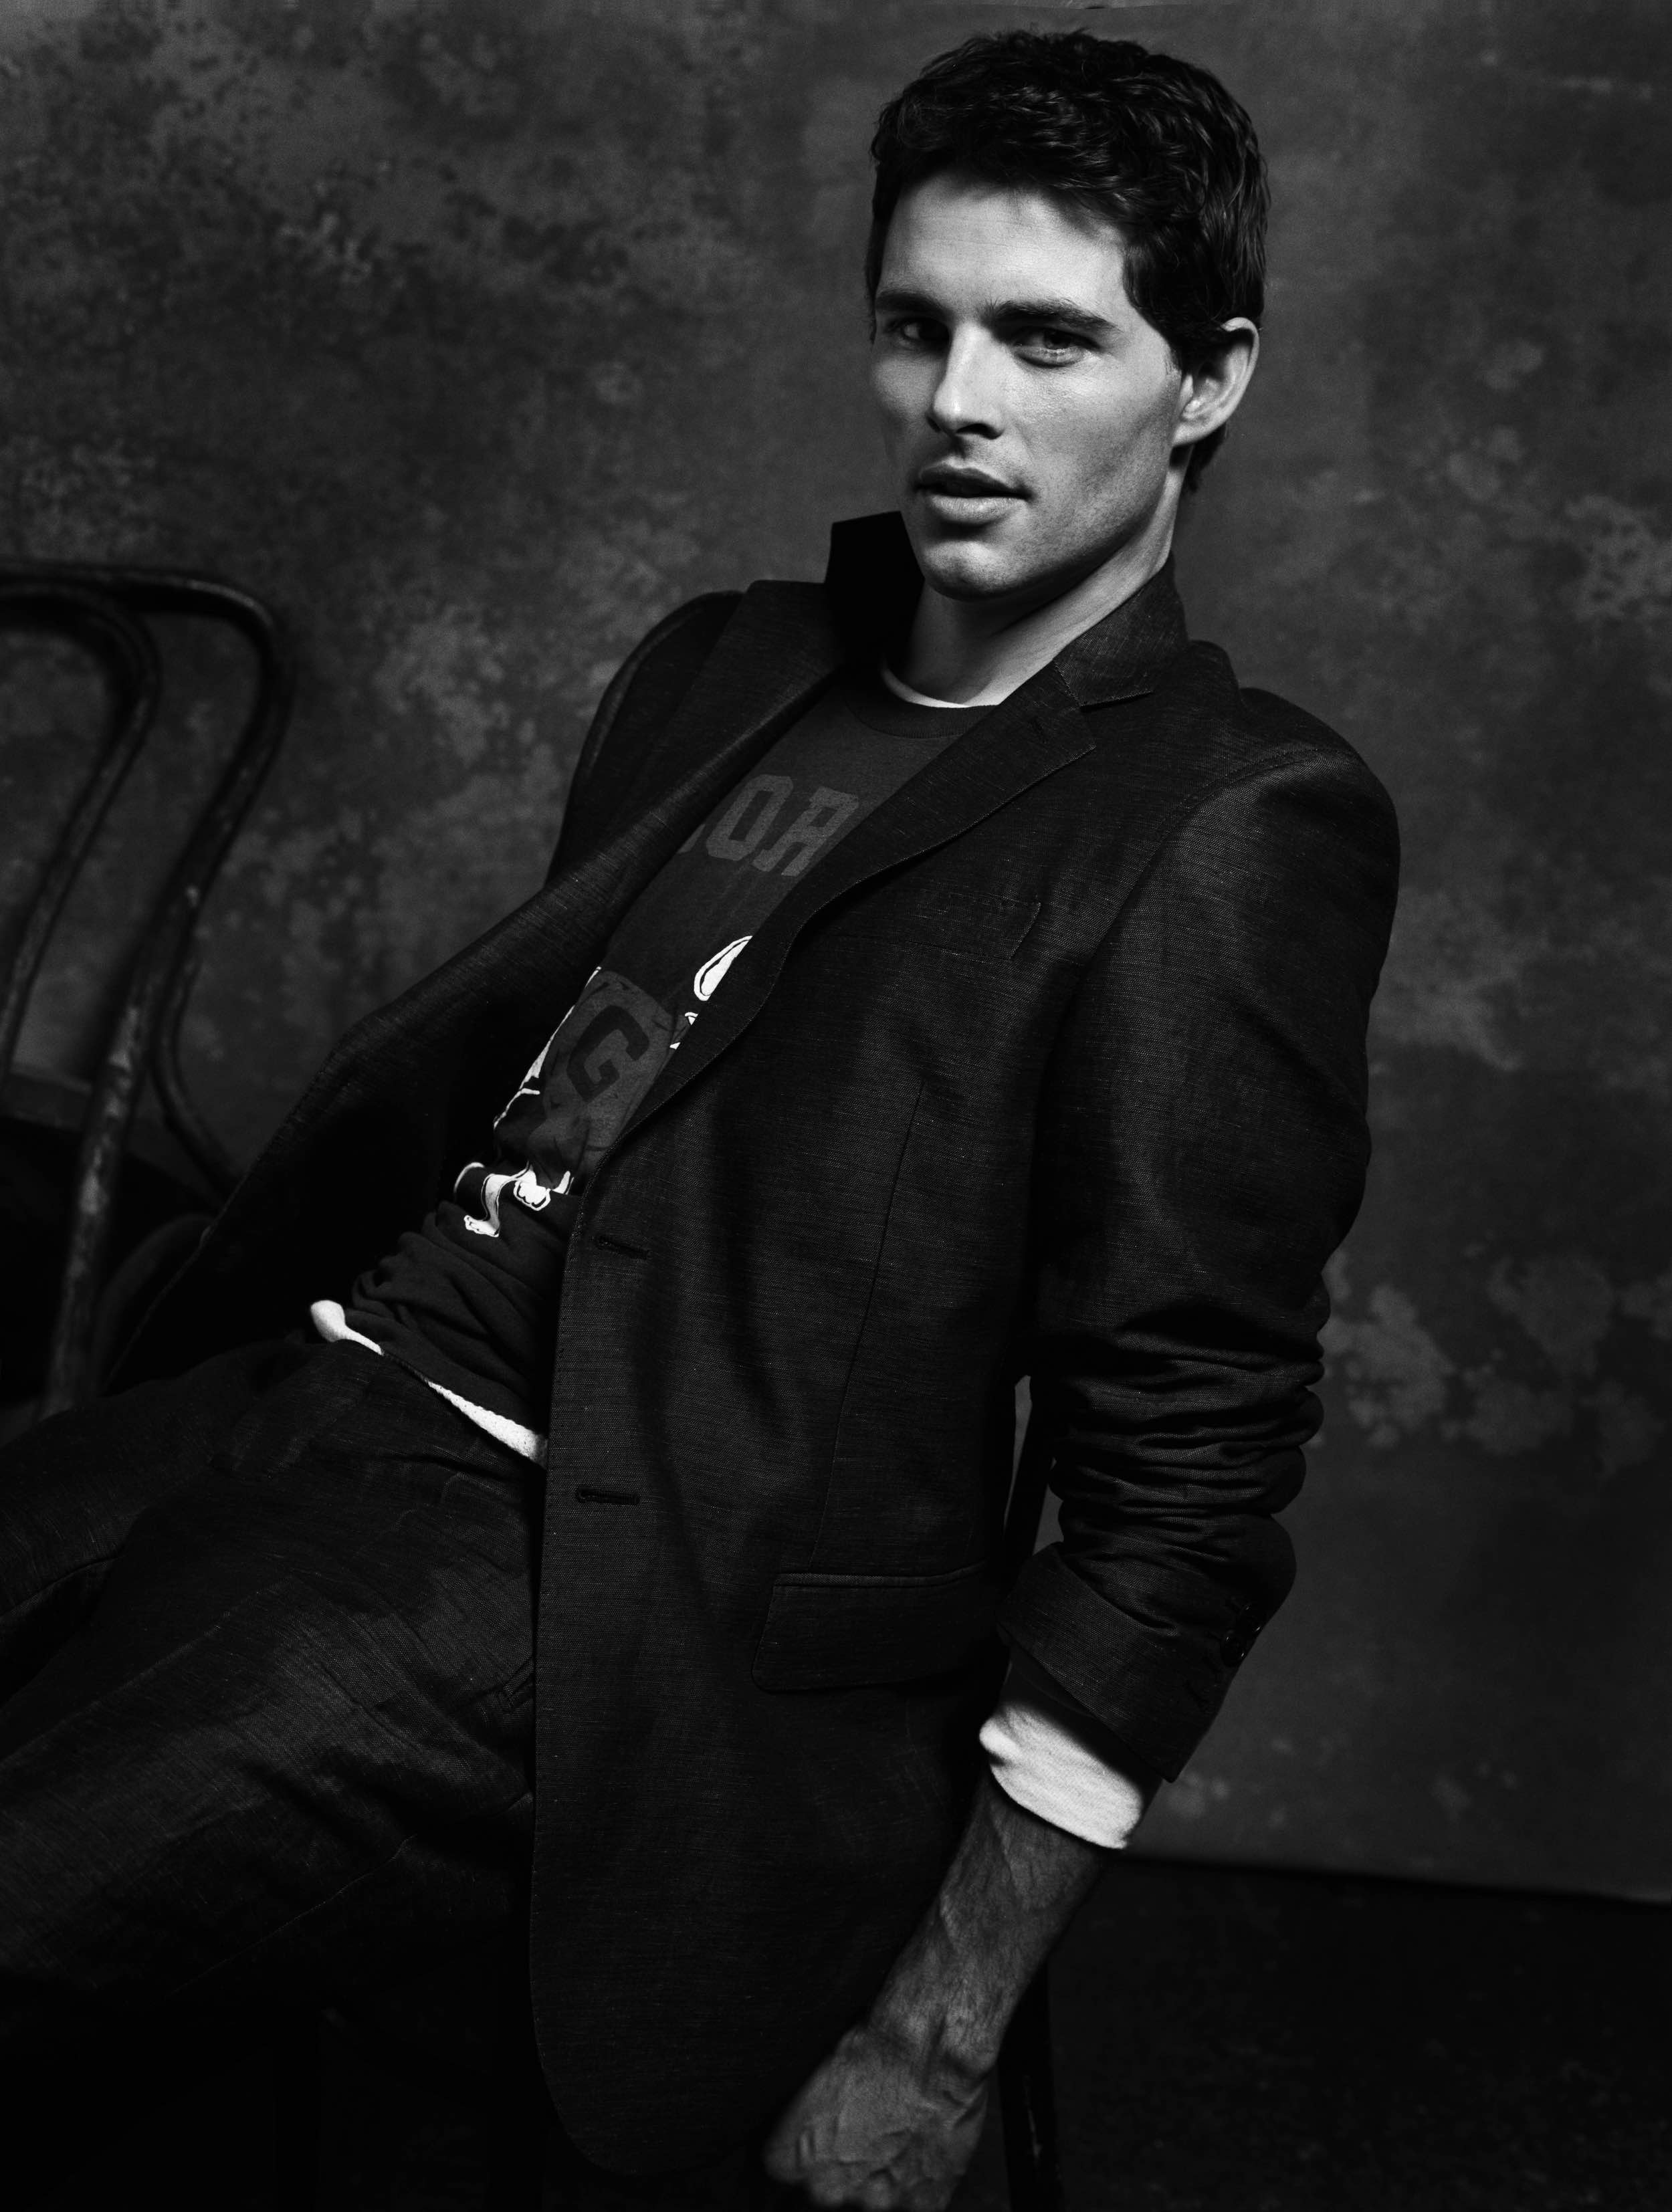 James Marsden photographed in black and white by Mark Liddell